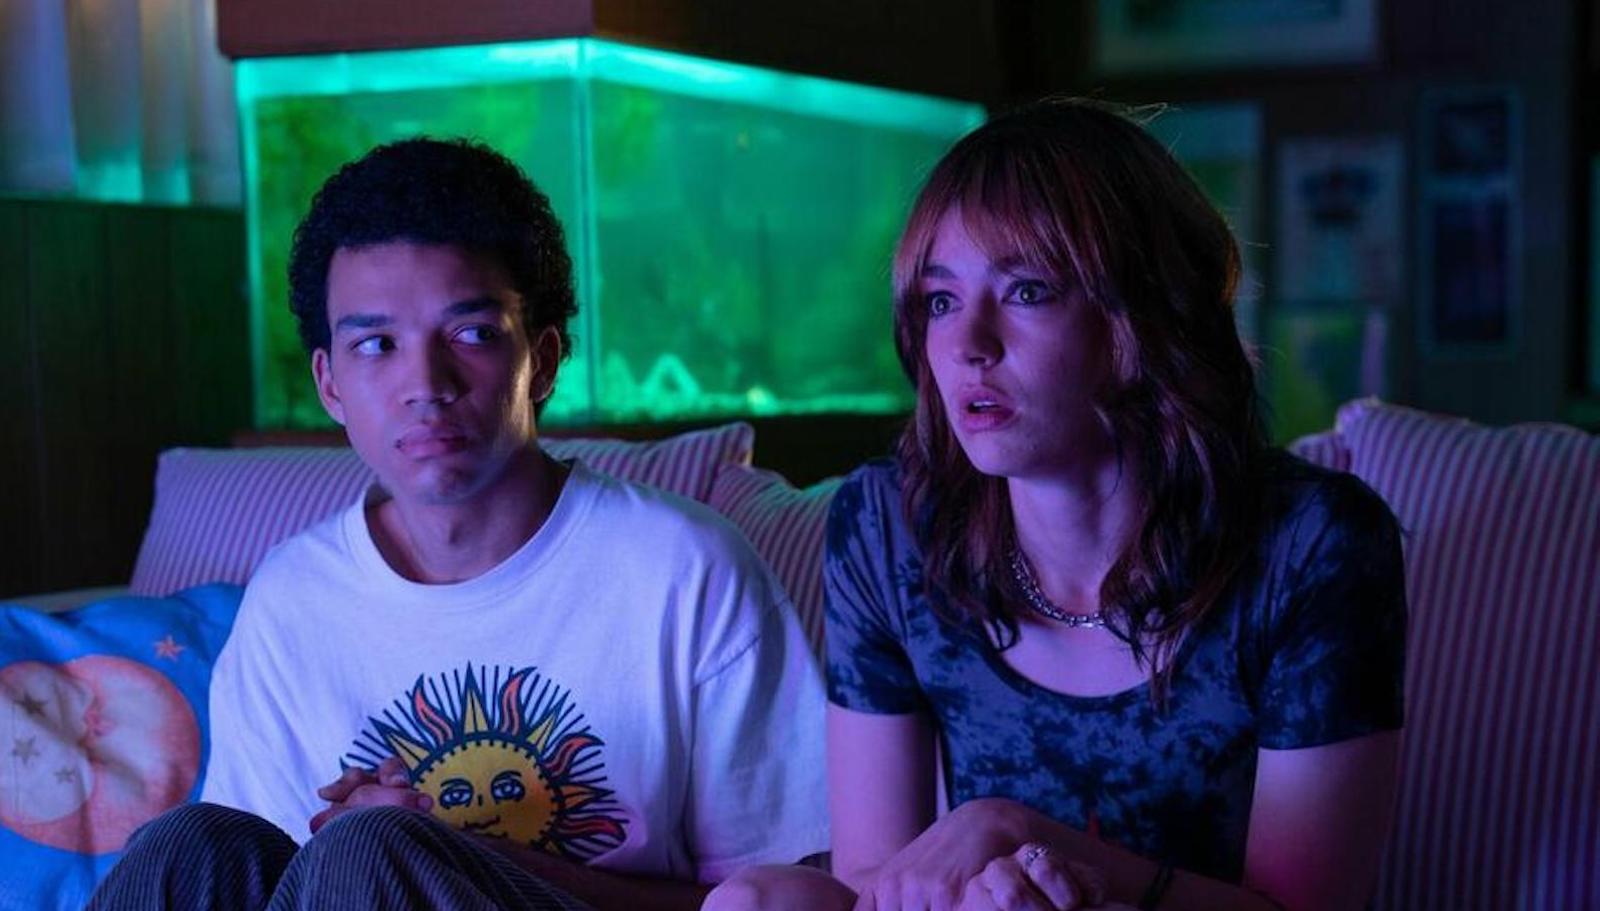 Two teenagers, one with short hair and medium brown skin and one with long hair and pale skin and red long hair, sit on a couch with a purple TV glow cast on them and a green light background.